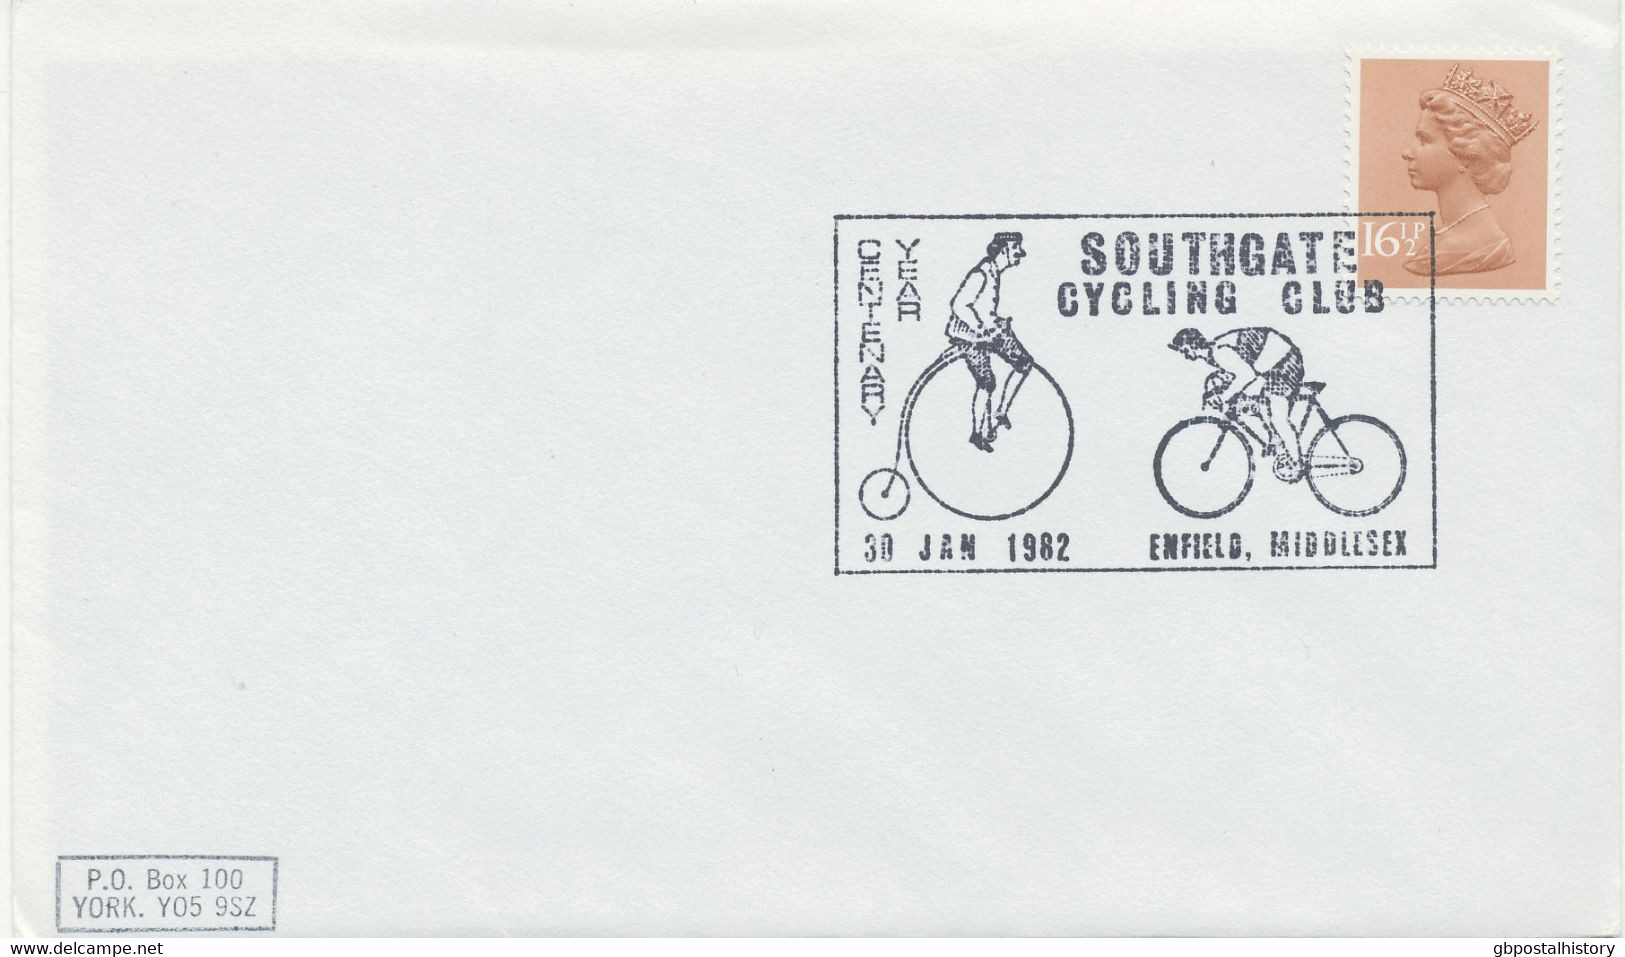 GB SOUTHGATE CYCLING CLUB CENTENARY YEAR 30 JAN 1982 ENFIELD, MIDDLESEX - Marcophilie